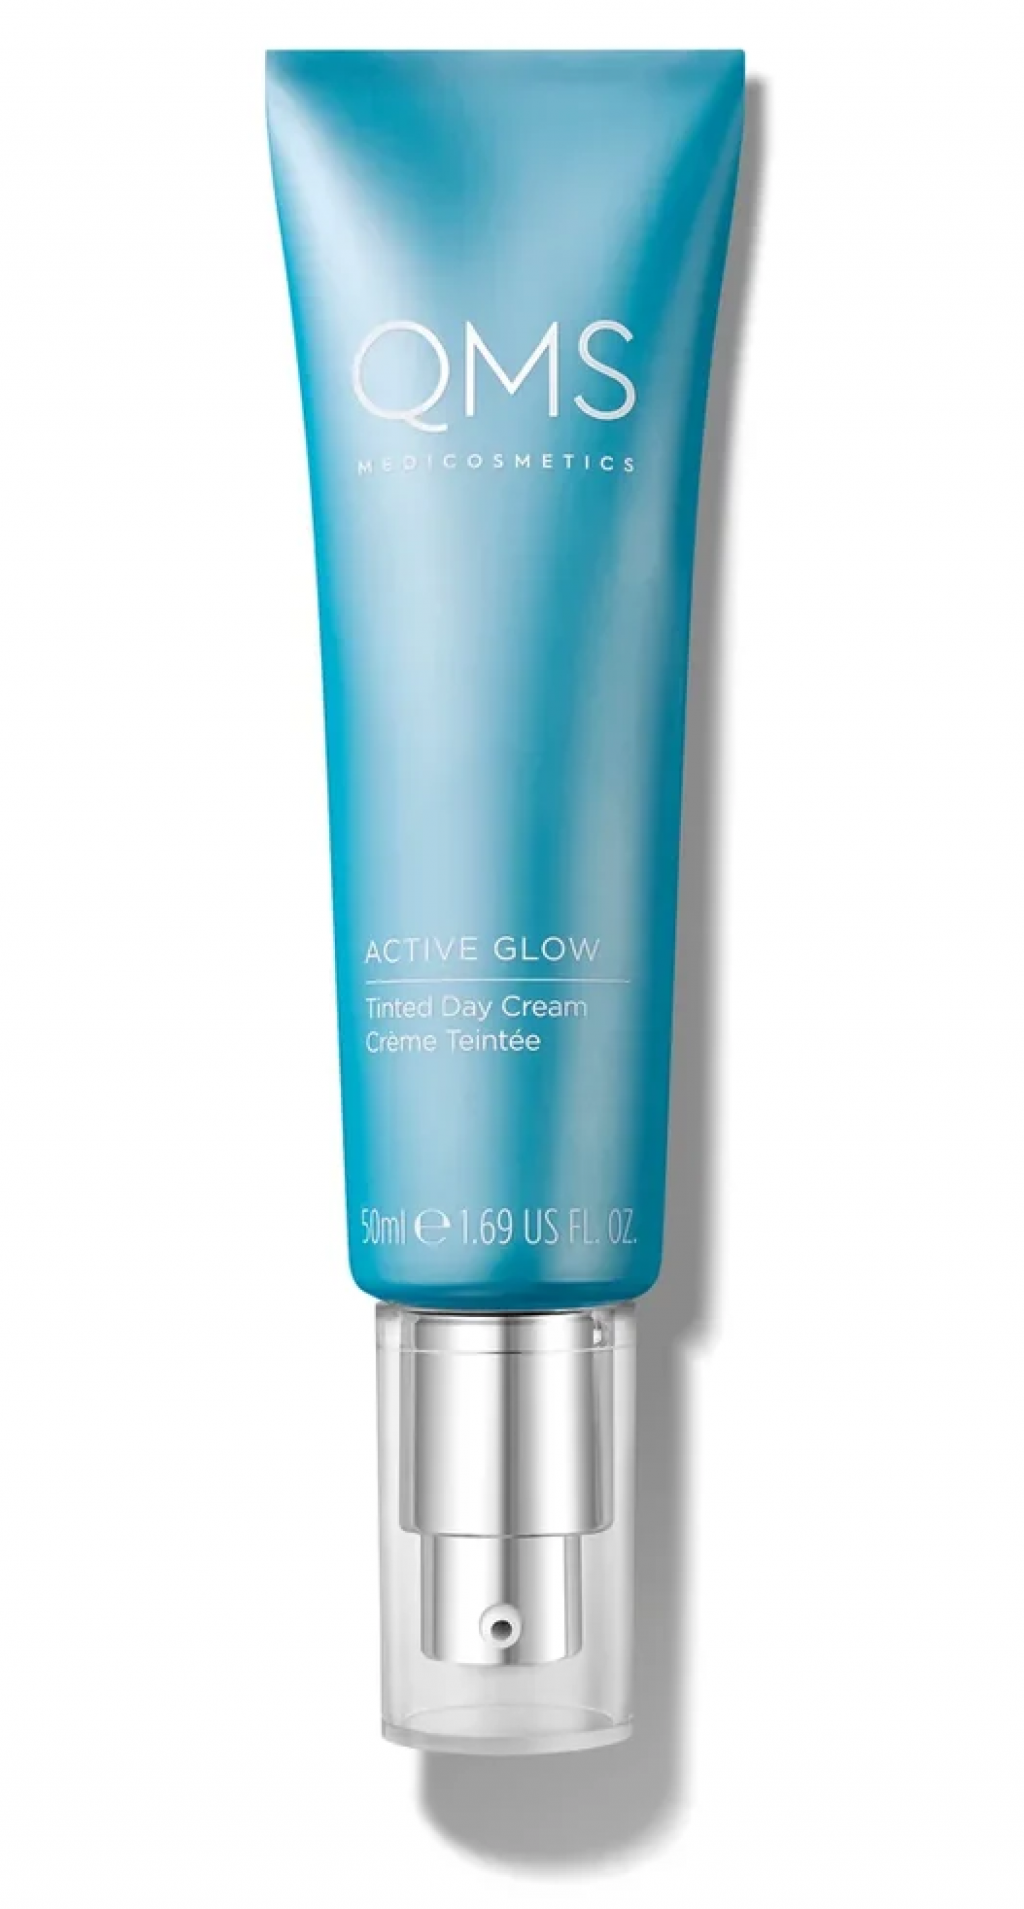 ACTIVE GLOW SPF 15 TINTED DAY CREAM 